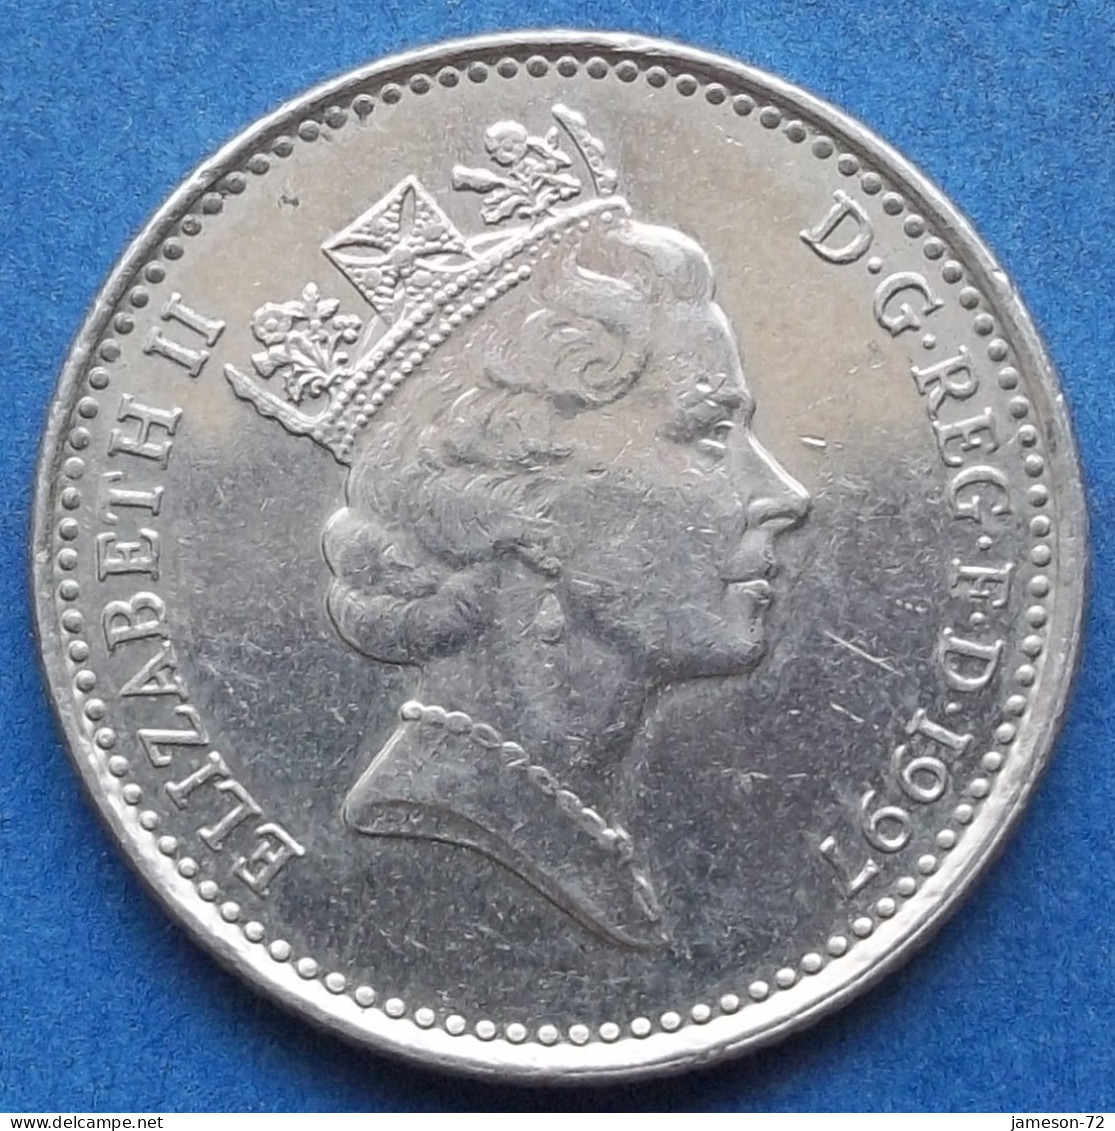 UK - 10 Pence 1997 "crowned Lion" KM# 938b Elizabeth II Decimal Coinage (1971-2022) - Edelweiss Coins - 10 Pence & 10 New Pence